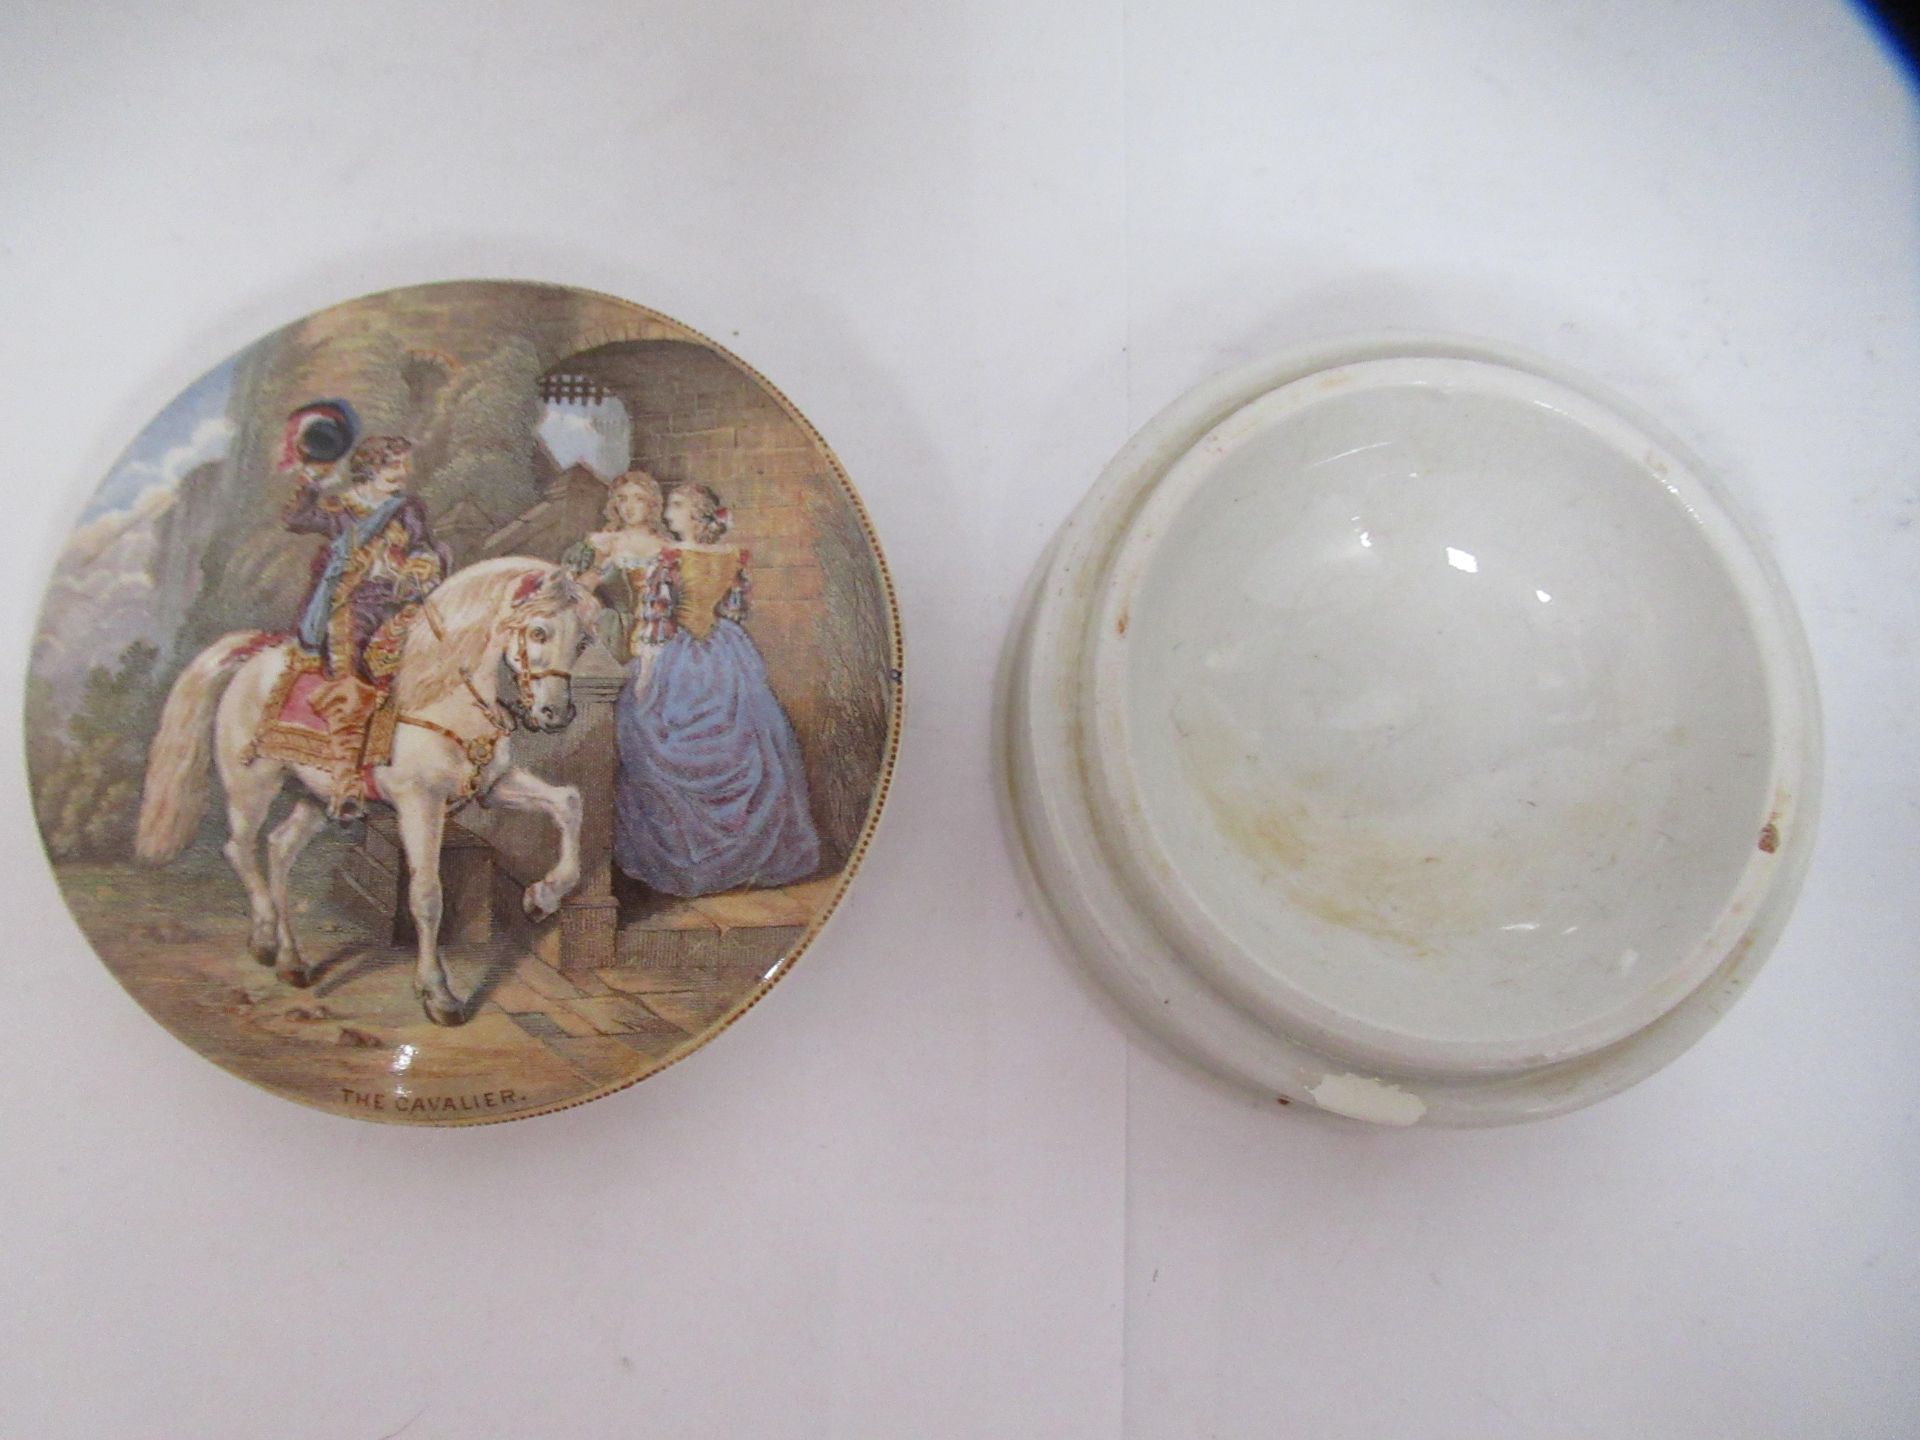 6x Prattware ceramic lids including 'On Guard', 'The Rivals', 'The Cavalier', and 'Peace' - Image 20 of 37